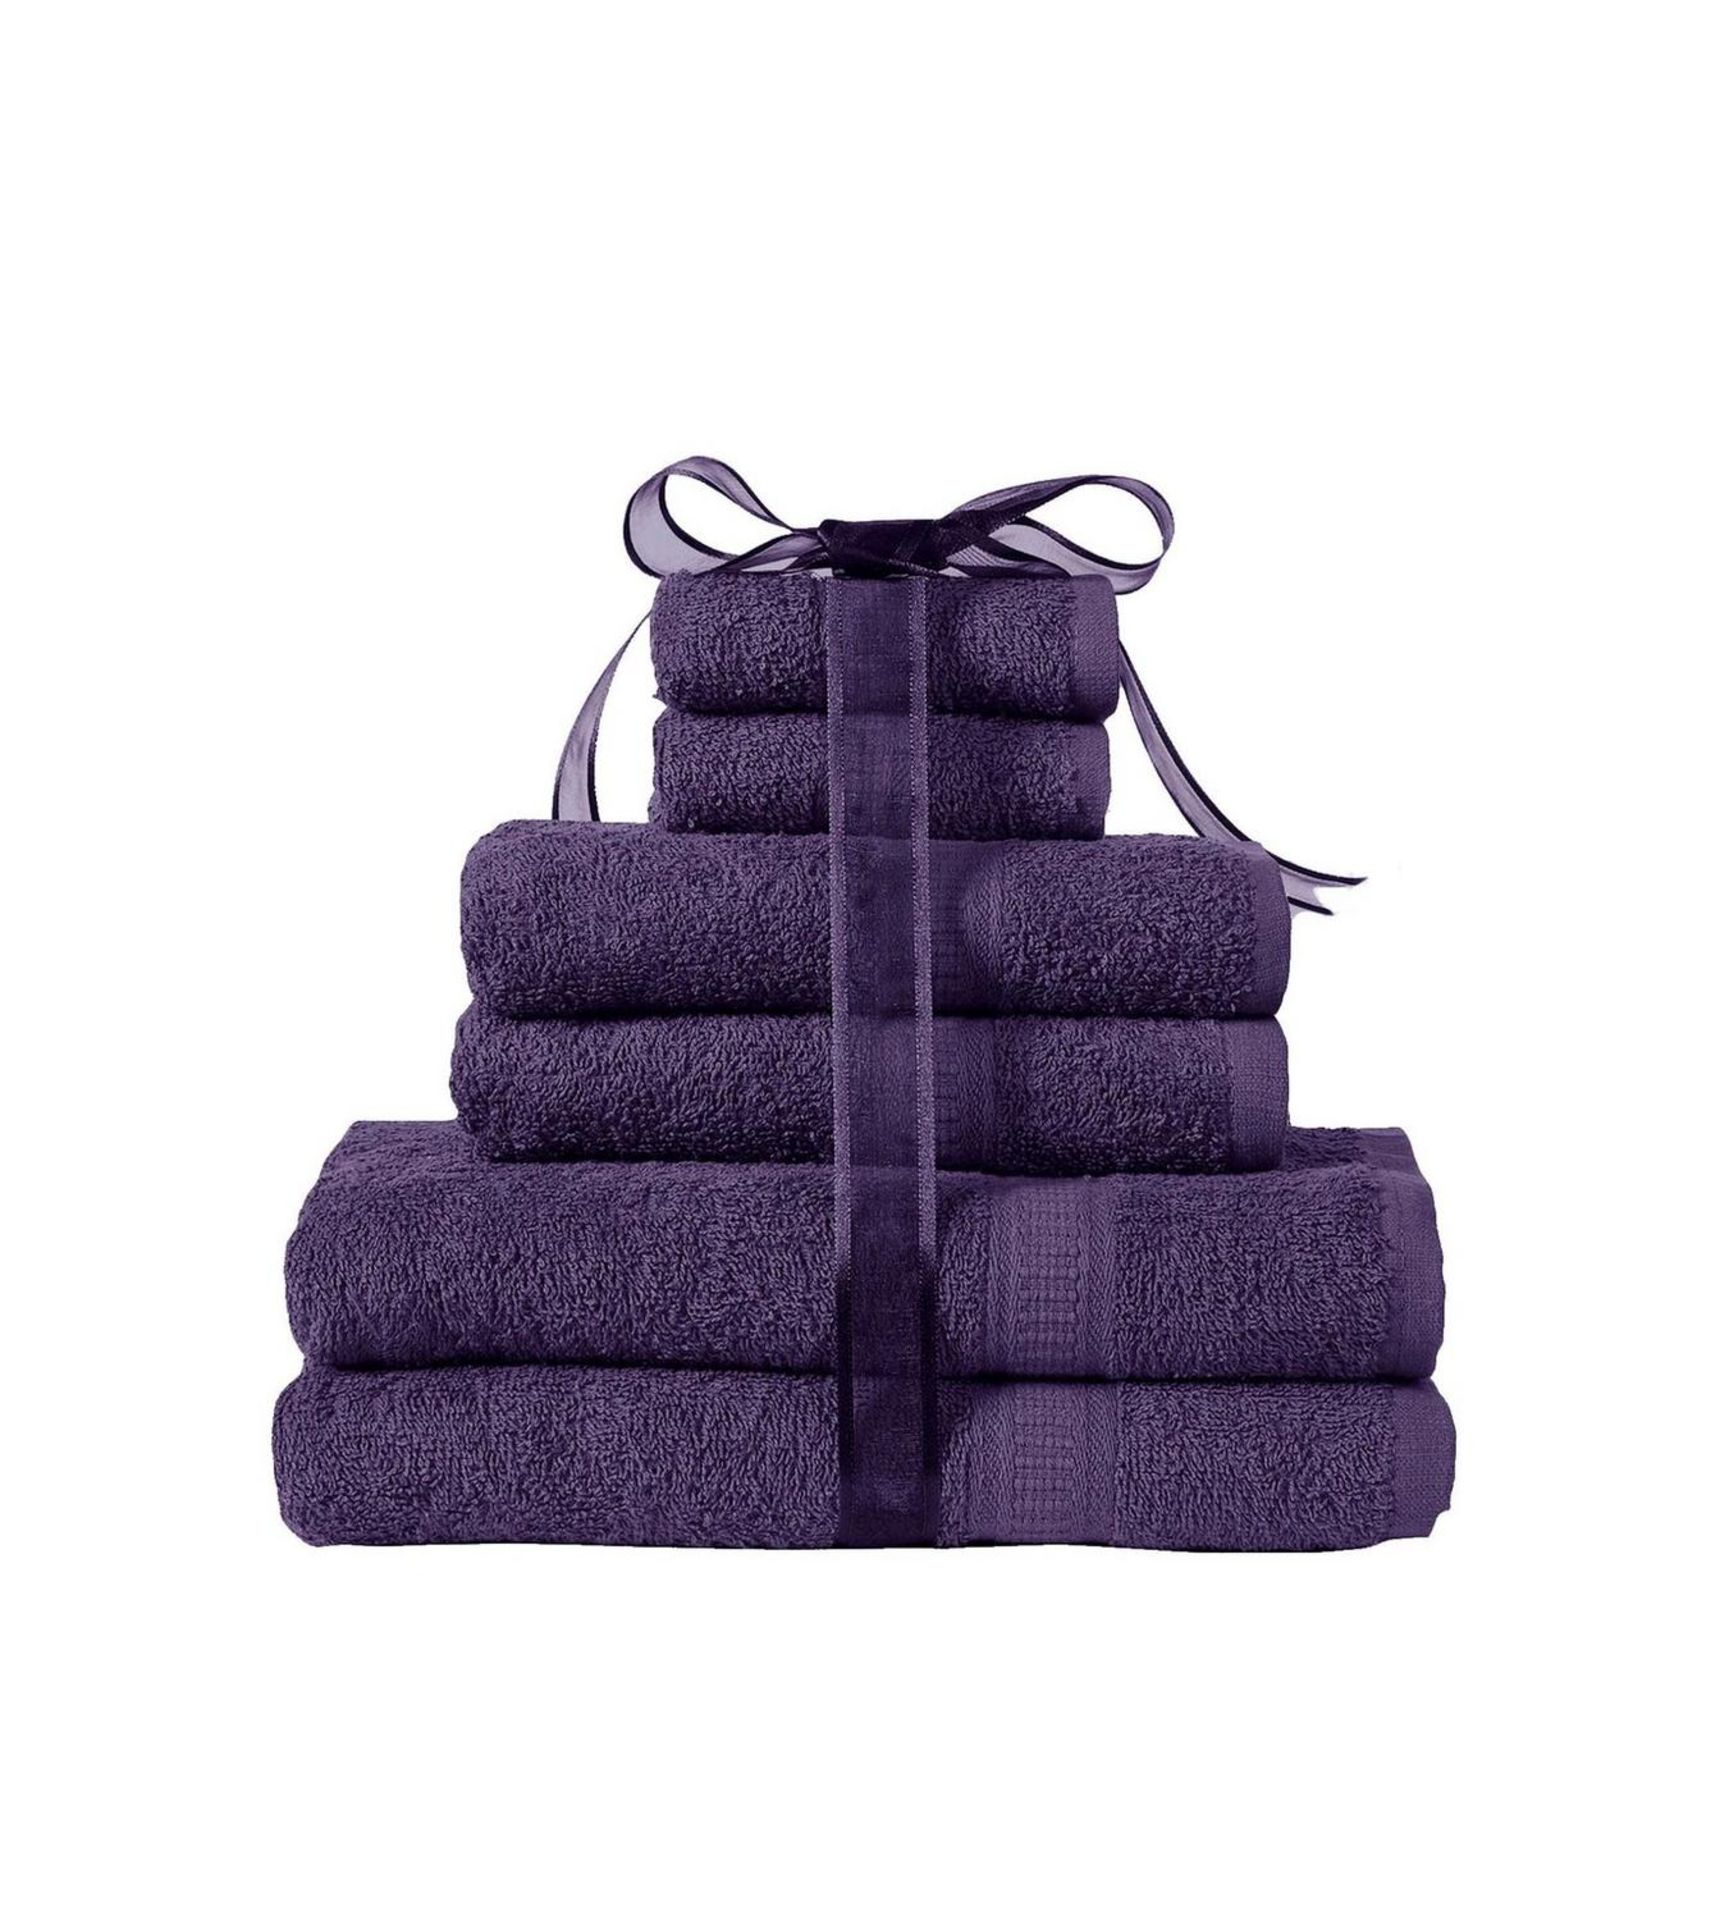 1 AS NEW BAGGED 6 PIECE TOWEL BALE IN PLUM (VIEWING AVAILABLE)